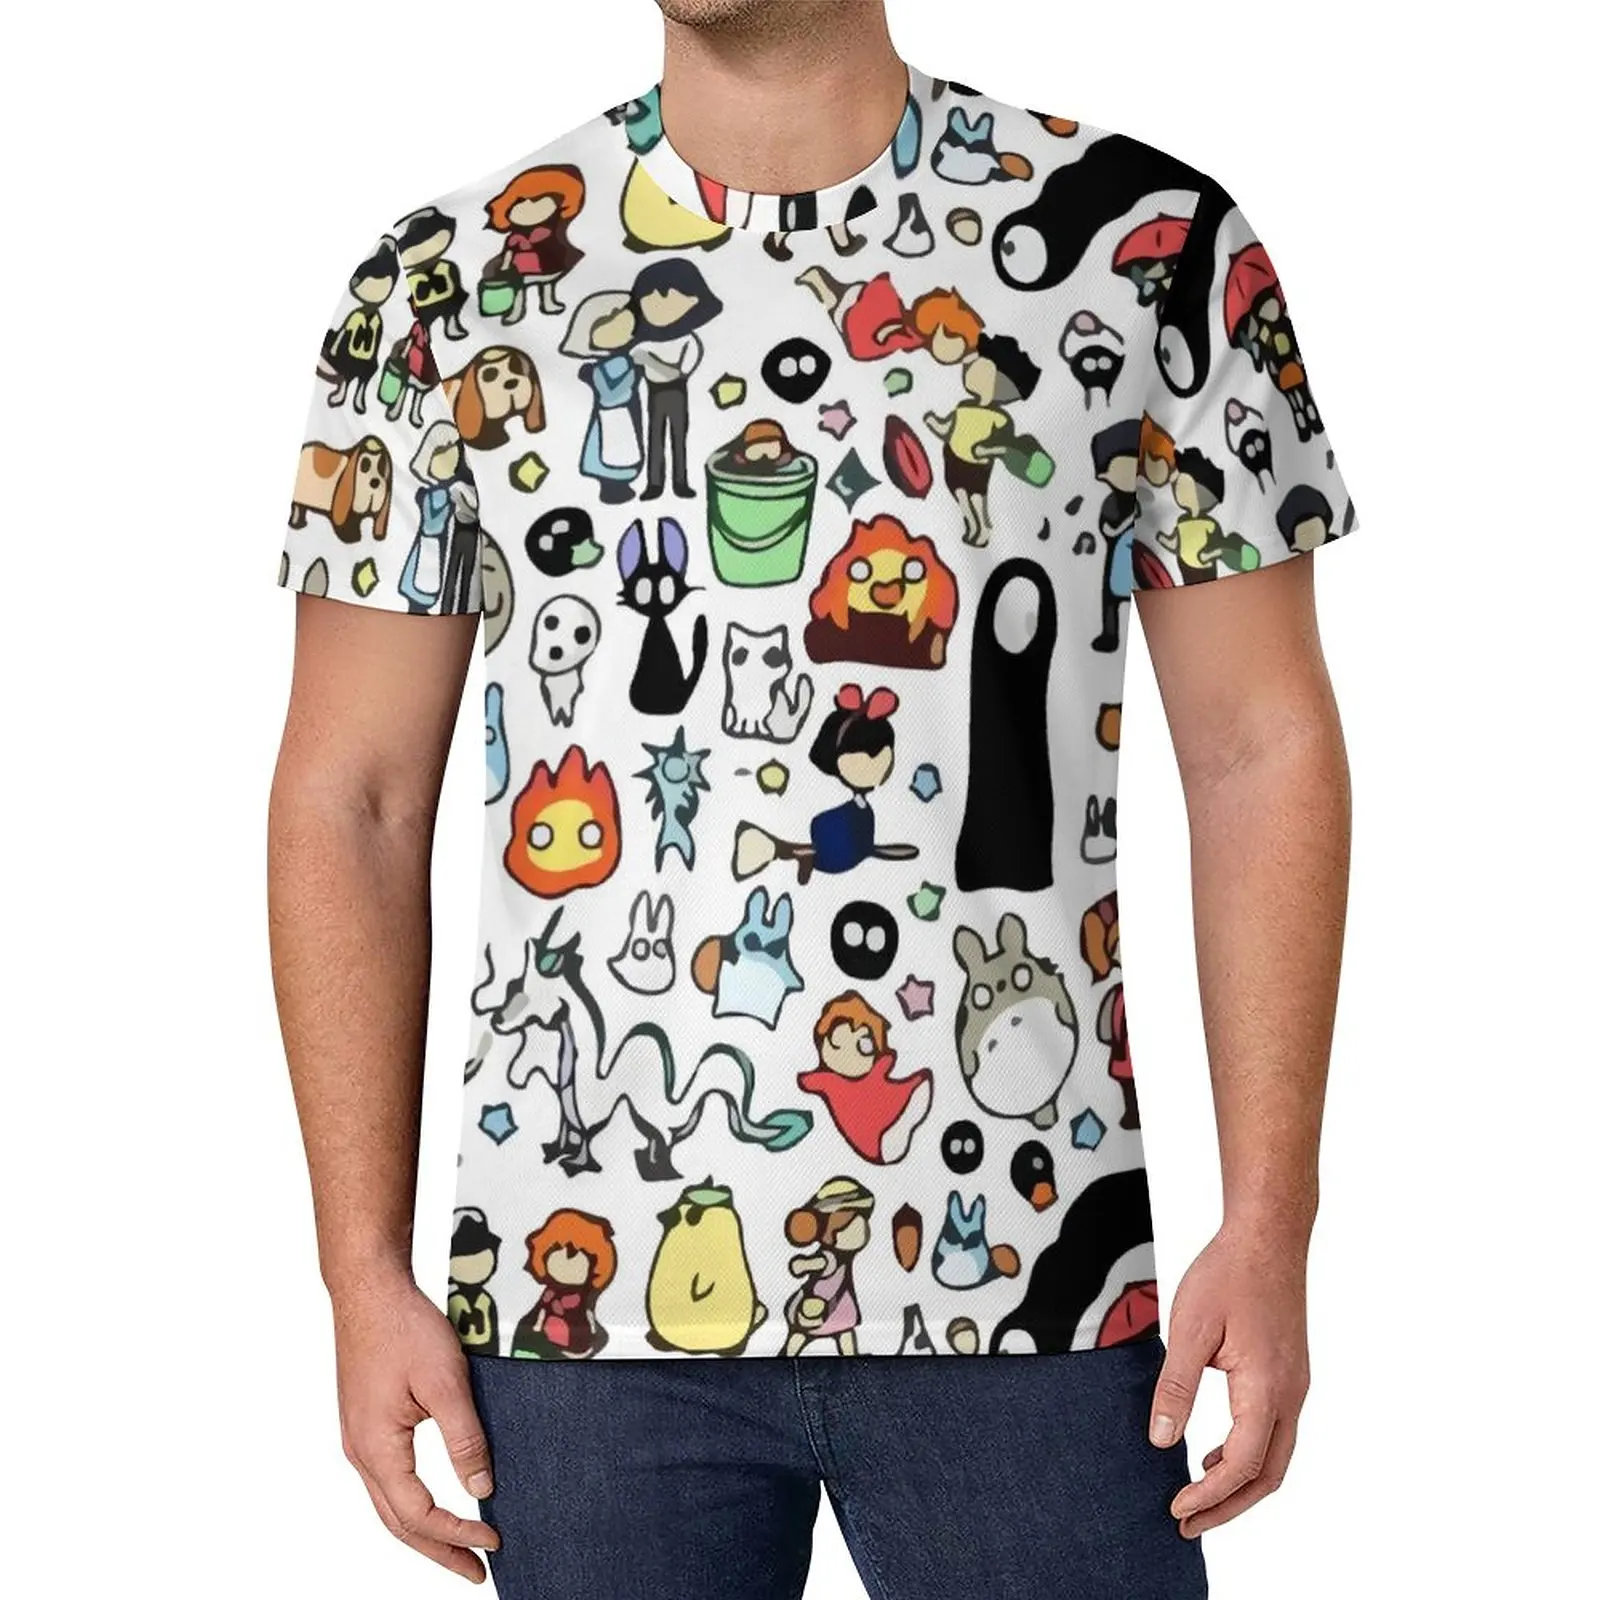 

Totoro Print T-Shirt Classic Anime Trending T-Shirts Short Sleeves Graphic Tops Essential Oversized Top Tees